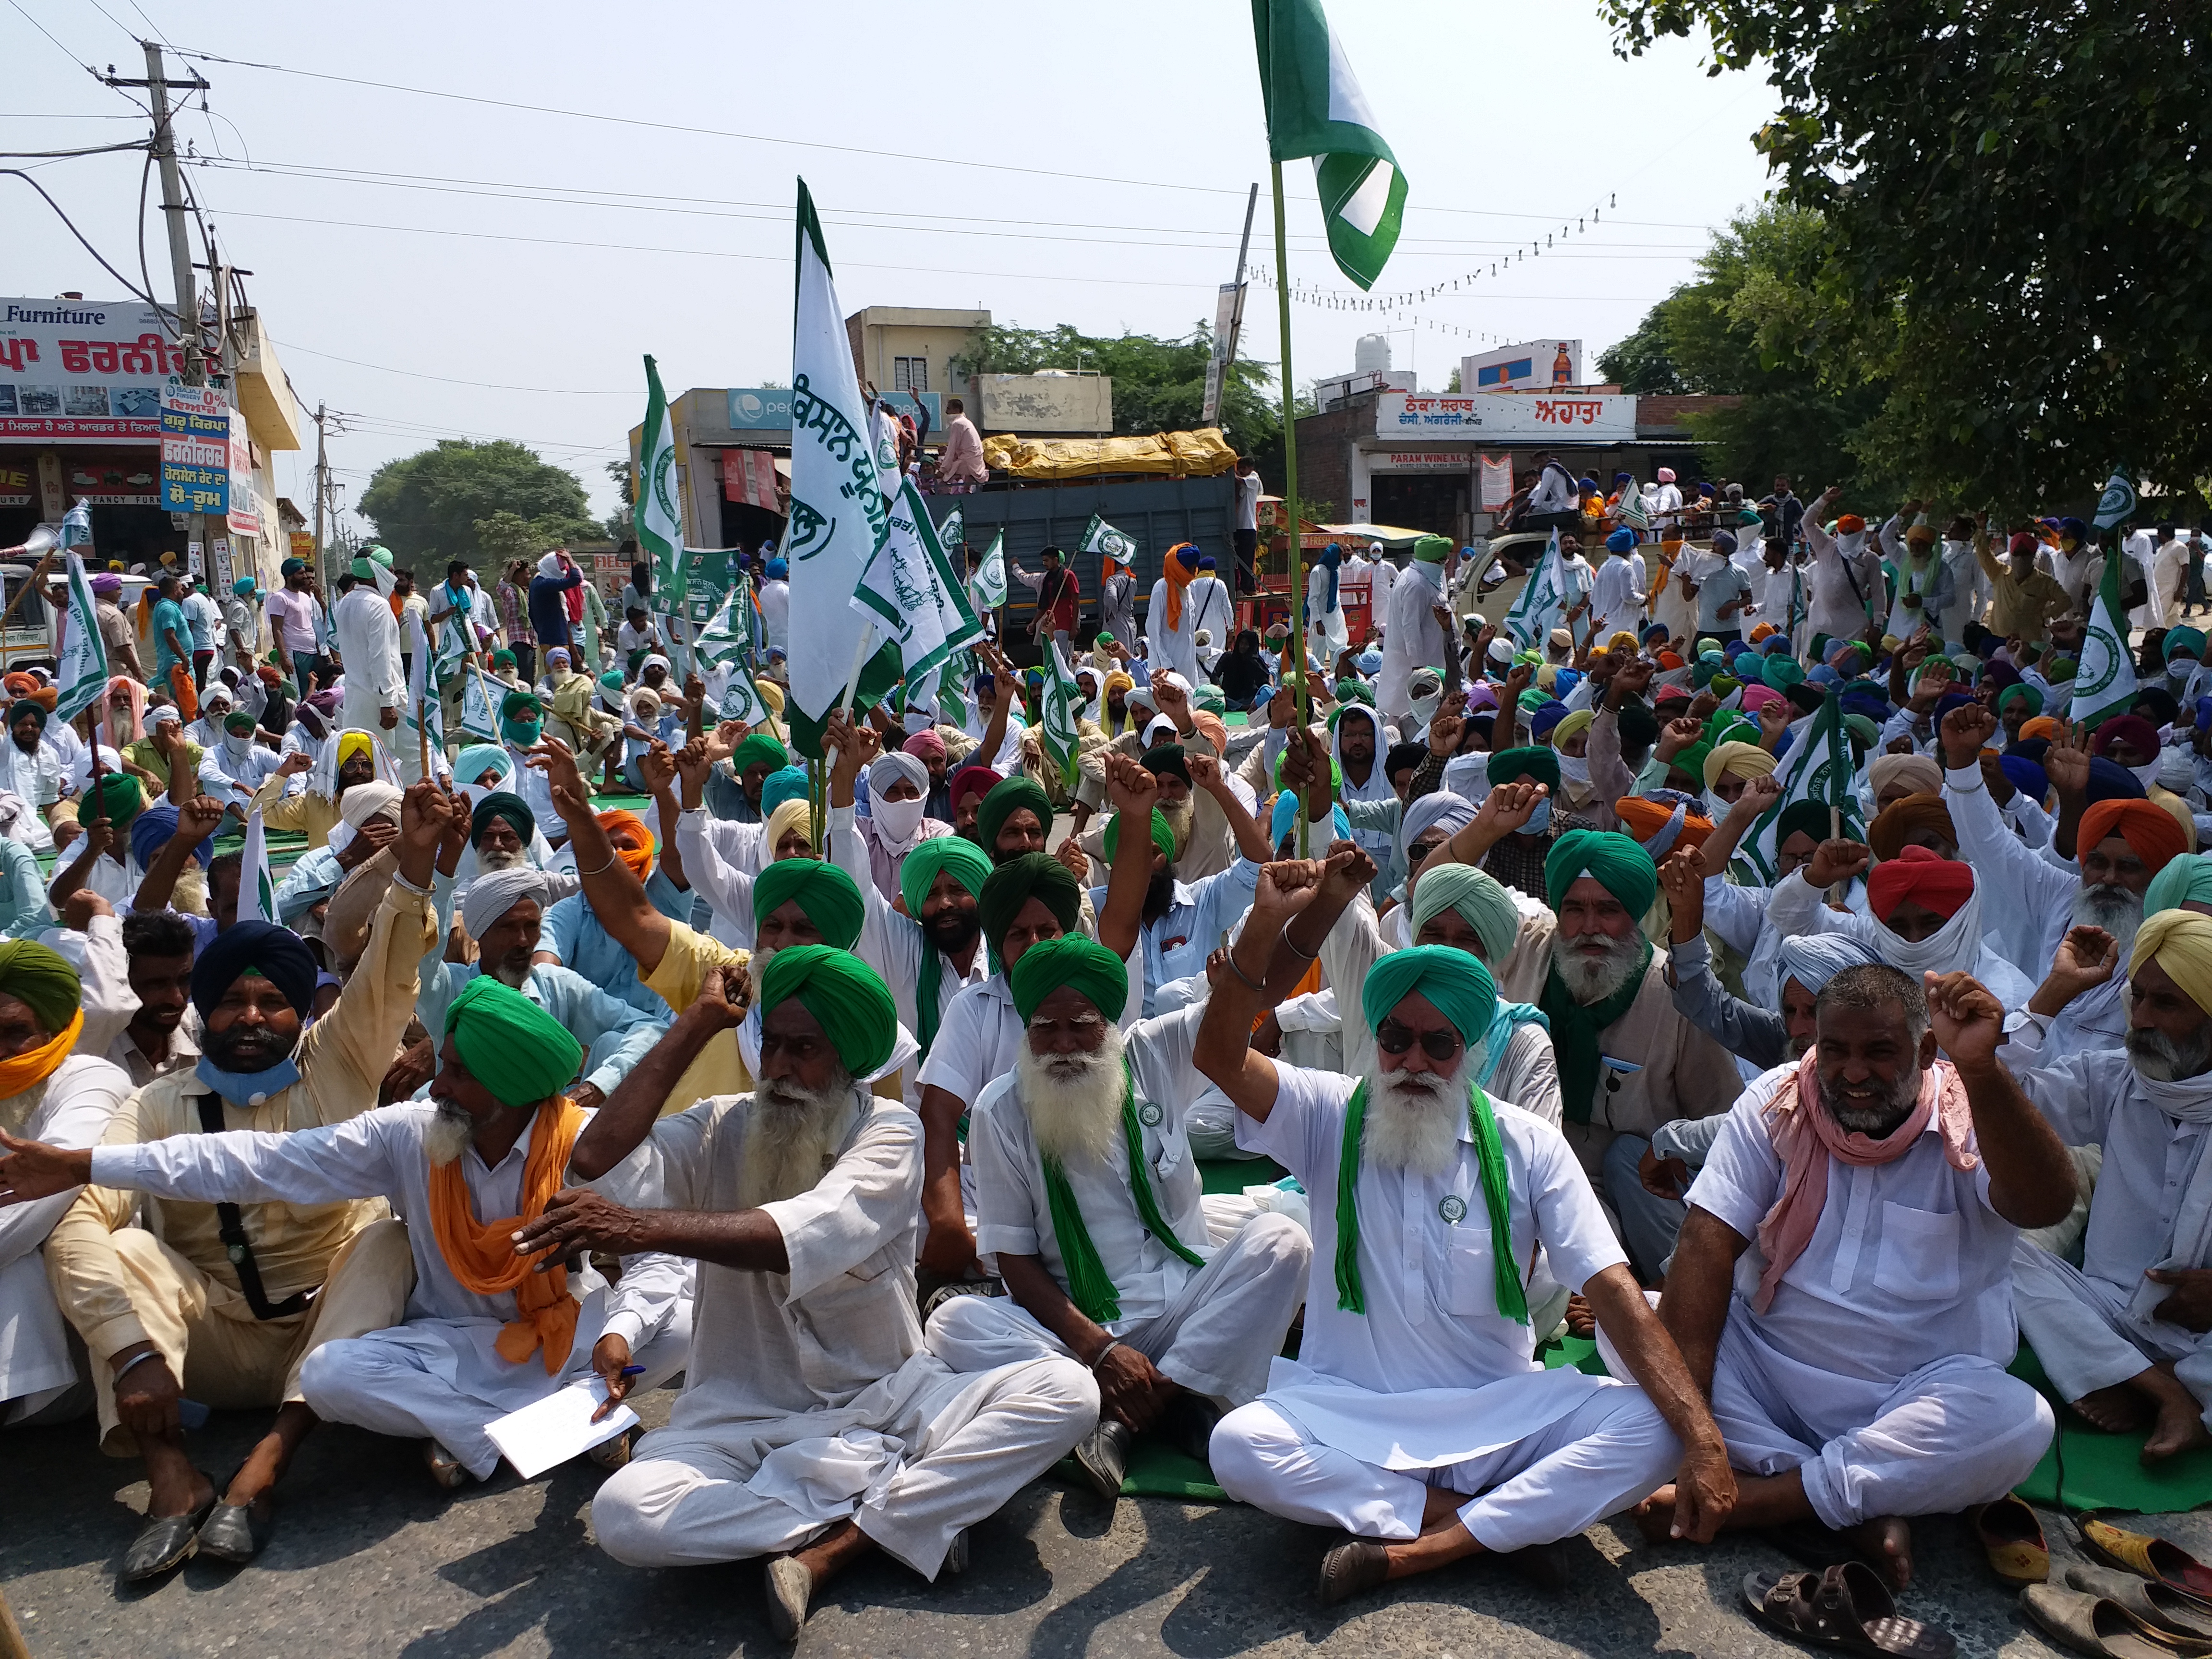 Farmers, laborers and arhtia staged daily protests in Mansa against Agriculture Ordinances